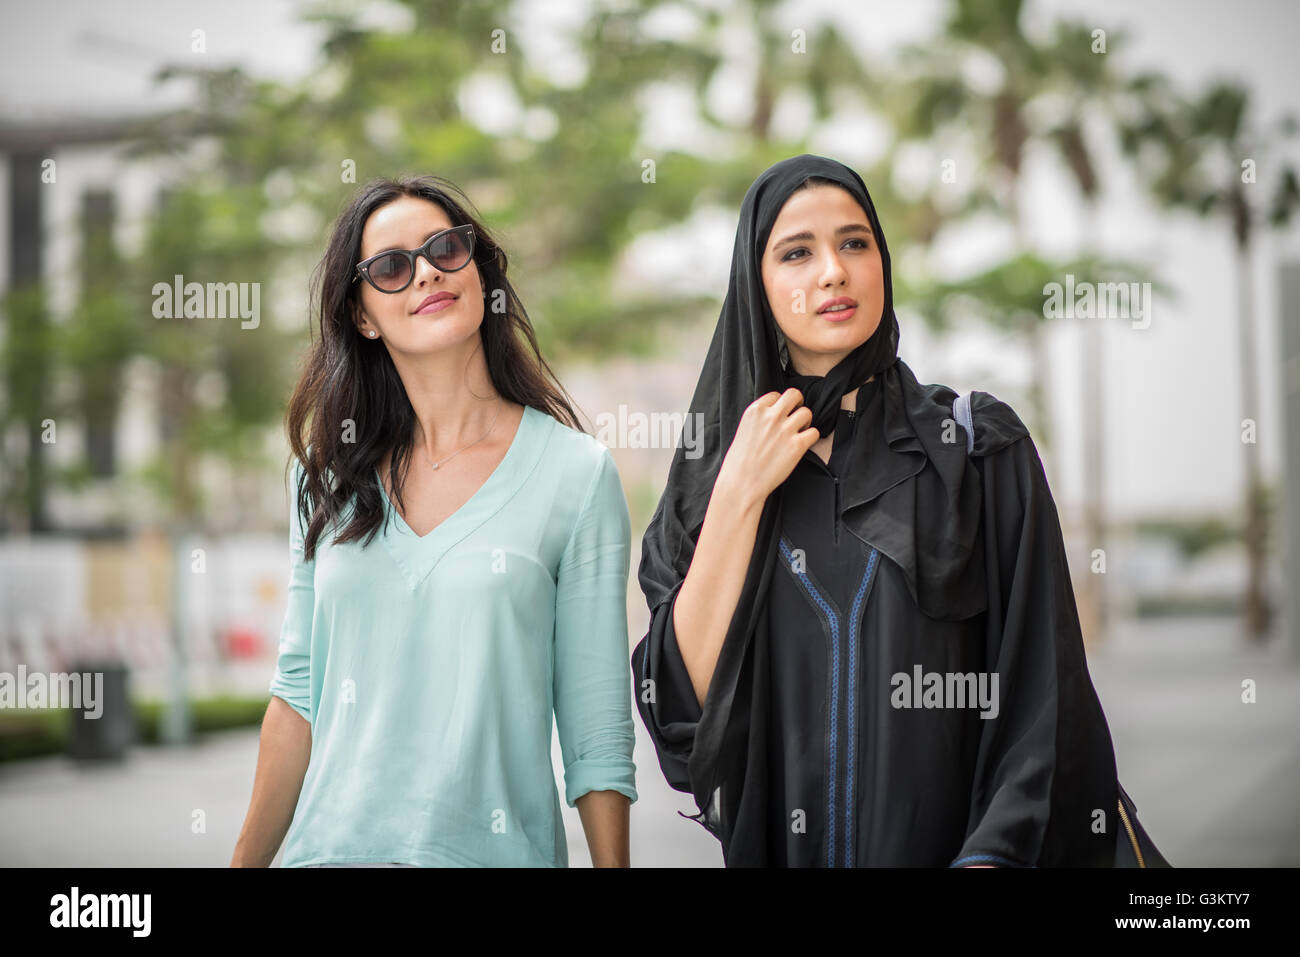 Young middle eastern woman wearing traditional clothing walking along street with female friend, Dubai, United Arab Emirates Stock Photo